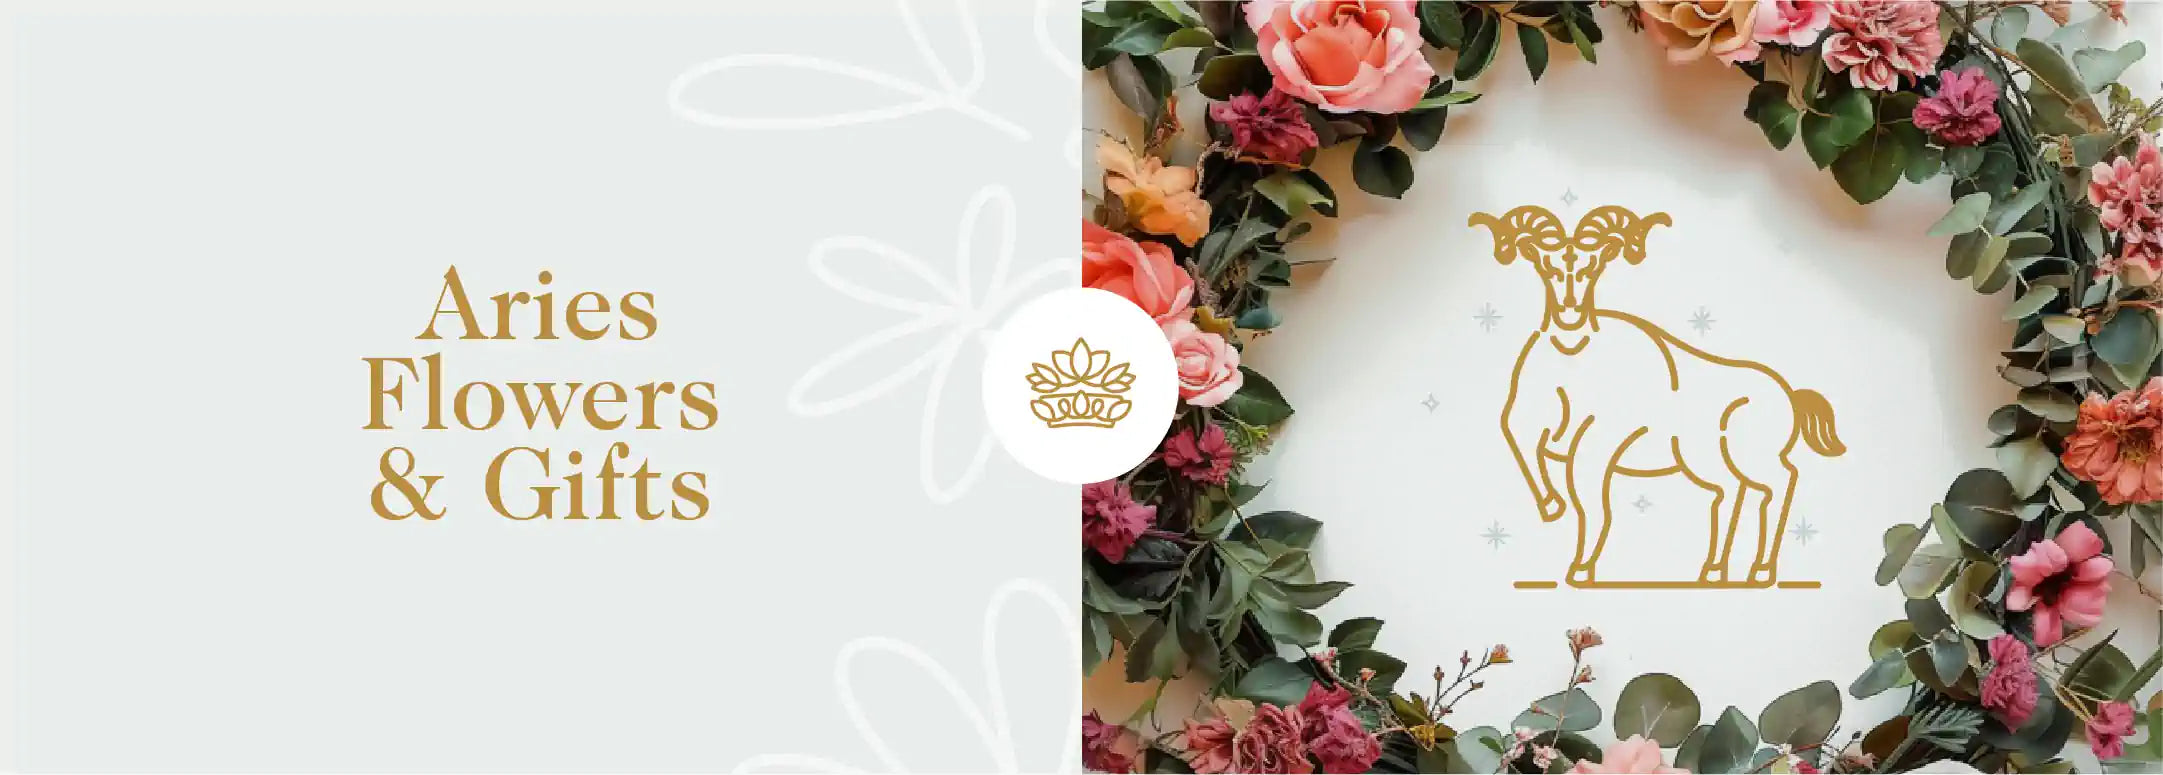 Aries Flowers and Gifts: Beautiful Floral Wreath Surrounding an Aries Zodiac Symbol, Ideal for Aries Birthdays and Celebrations. Fabulous Flowers and Gifts.